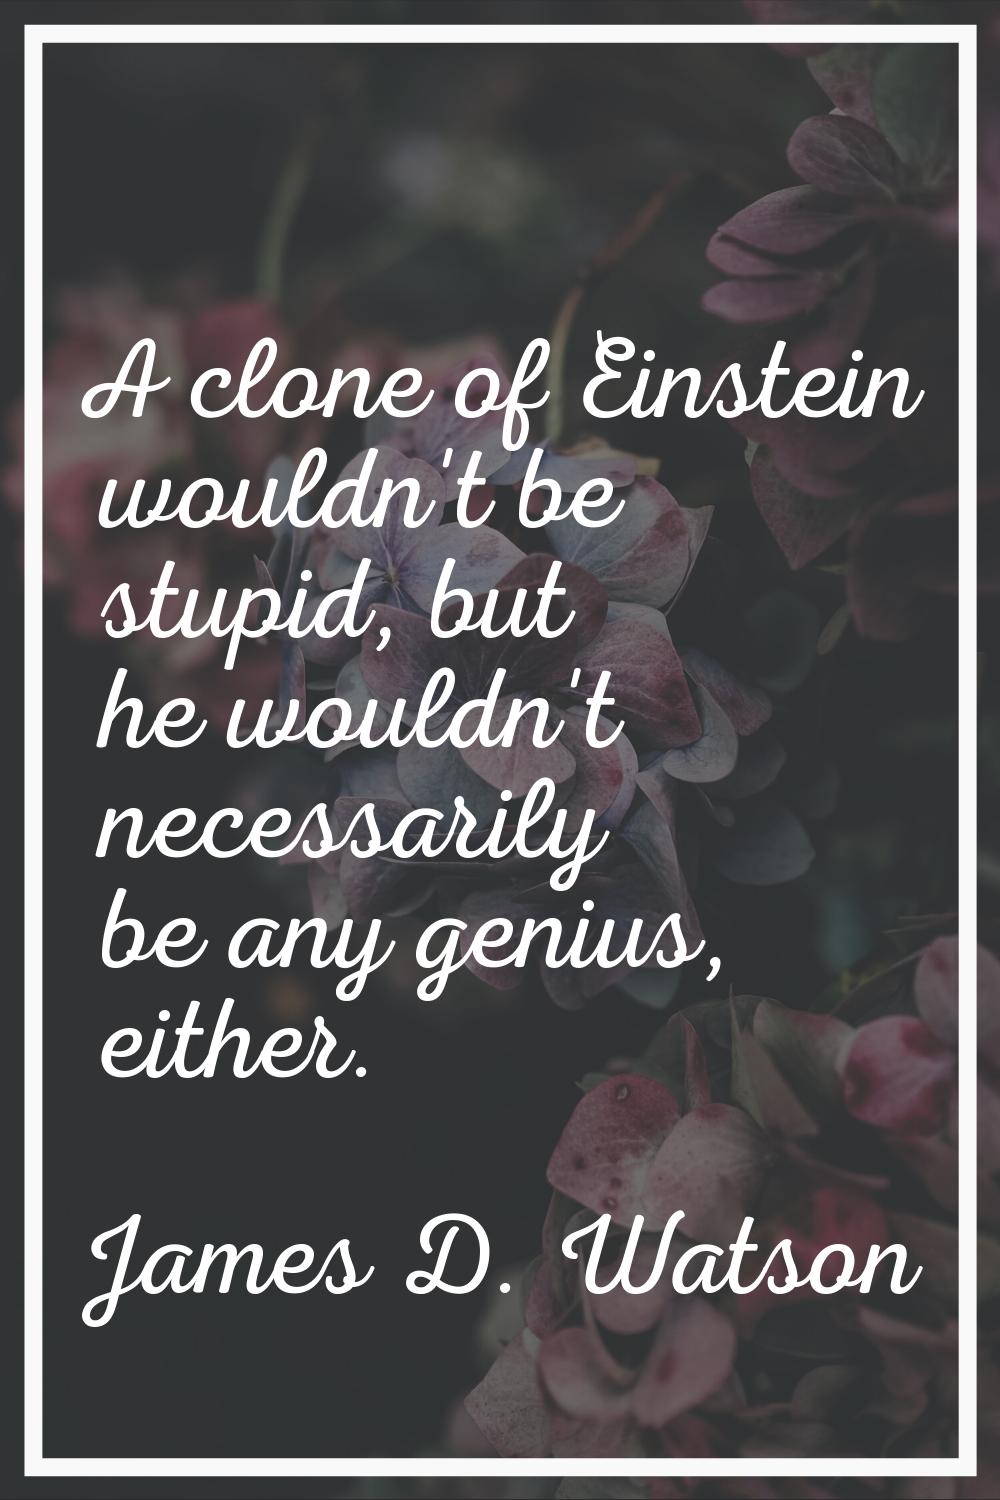 A clone of Einstein wouldn't be stupid, but he wouldn't necessarily be any genius, either.